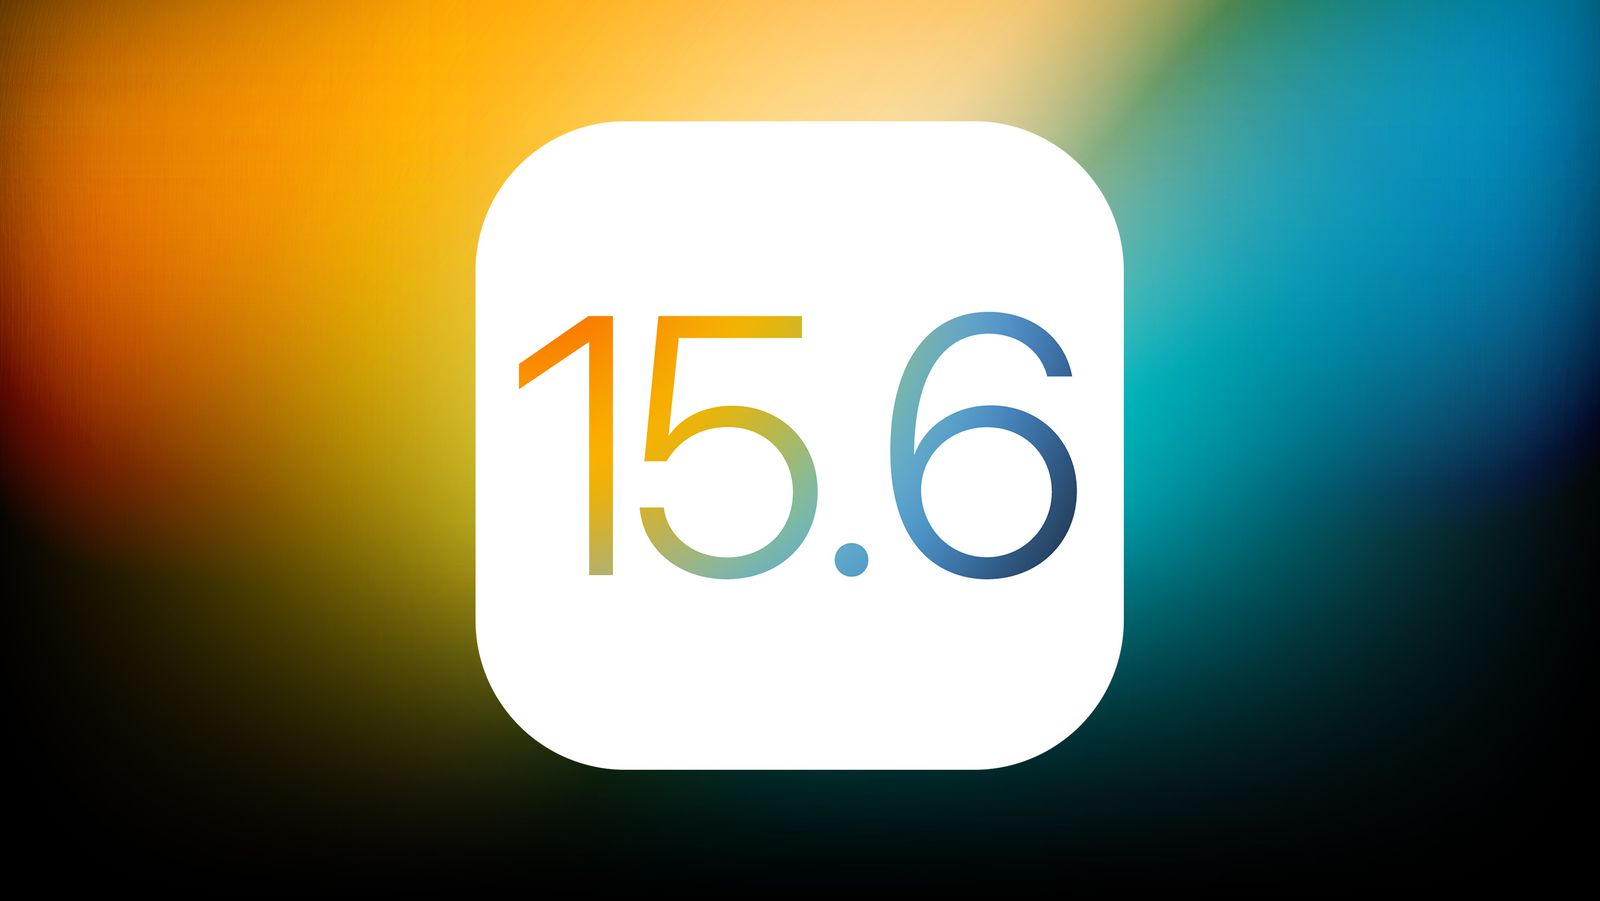 Apple has released iOS 15.6: Here's what's new and when to expect the firmware